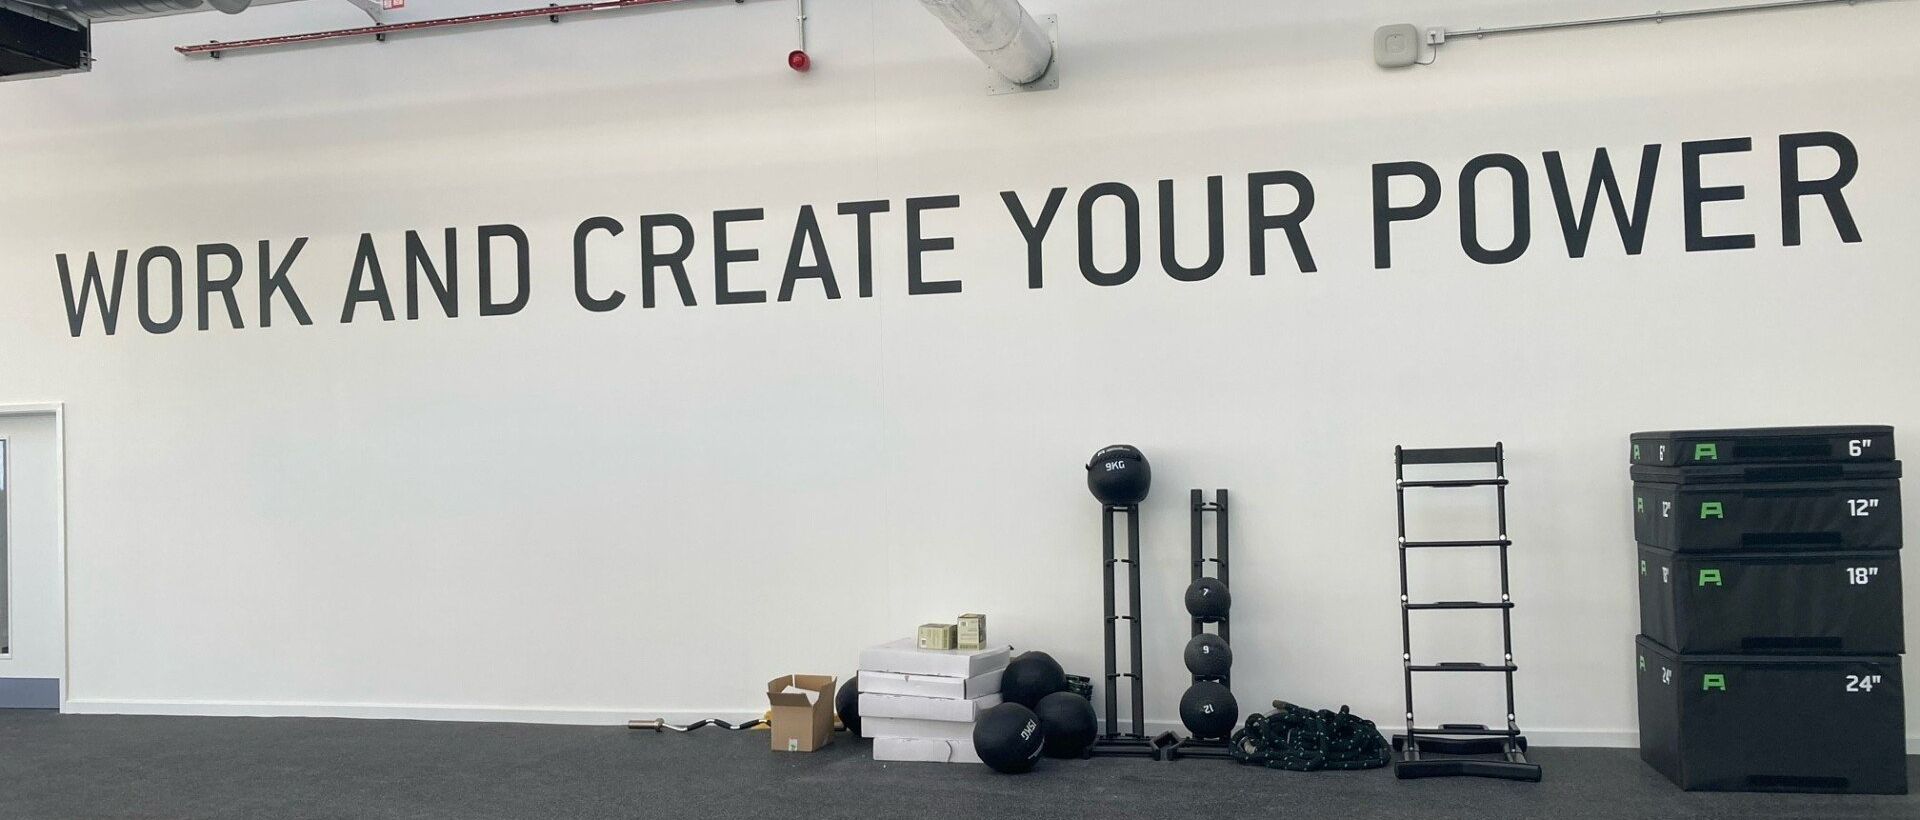 A sign on a wall that says work and create your power